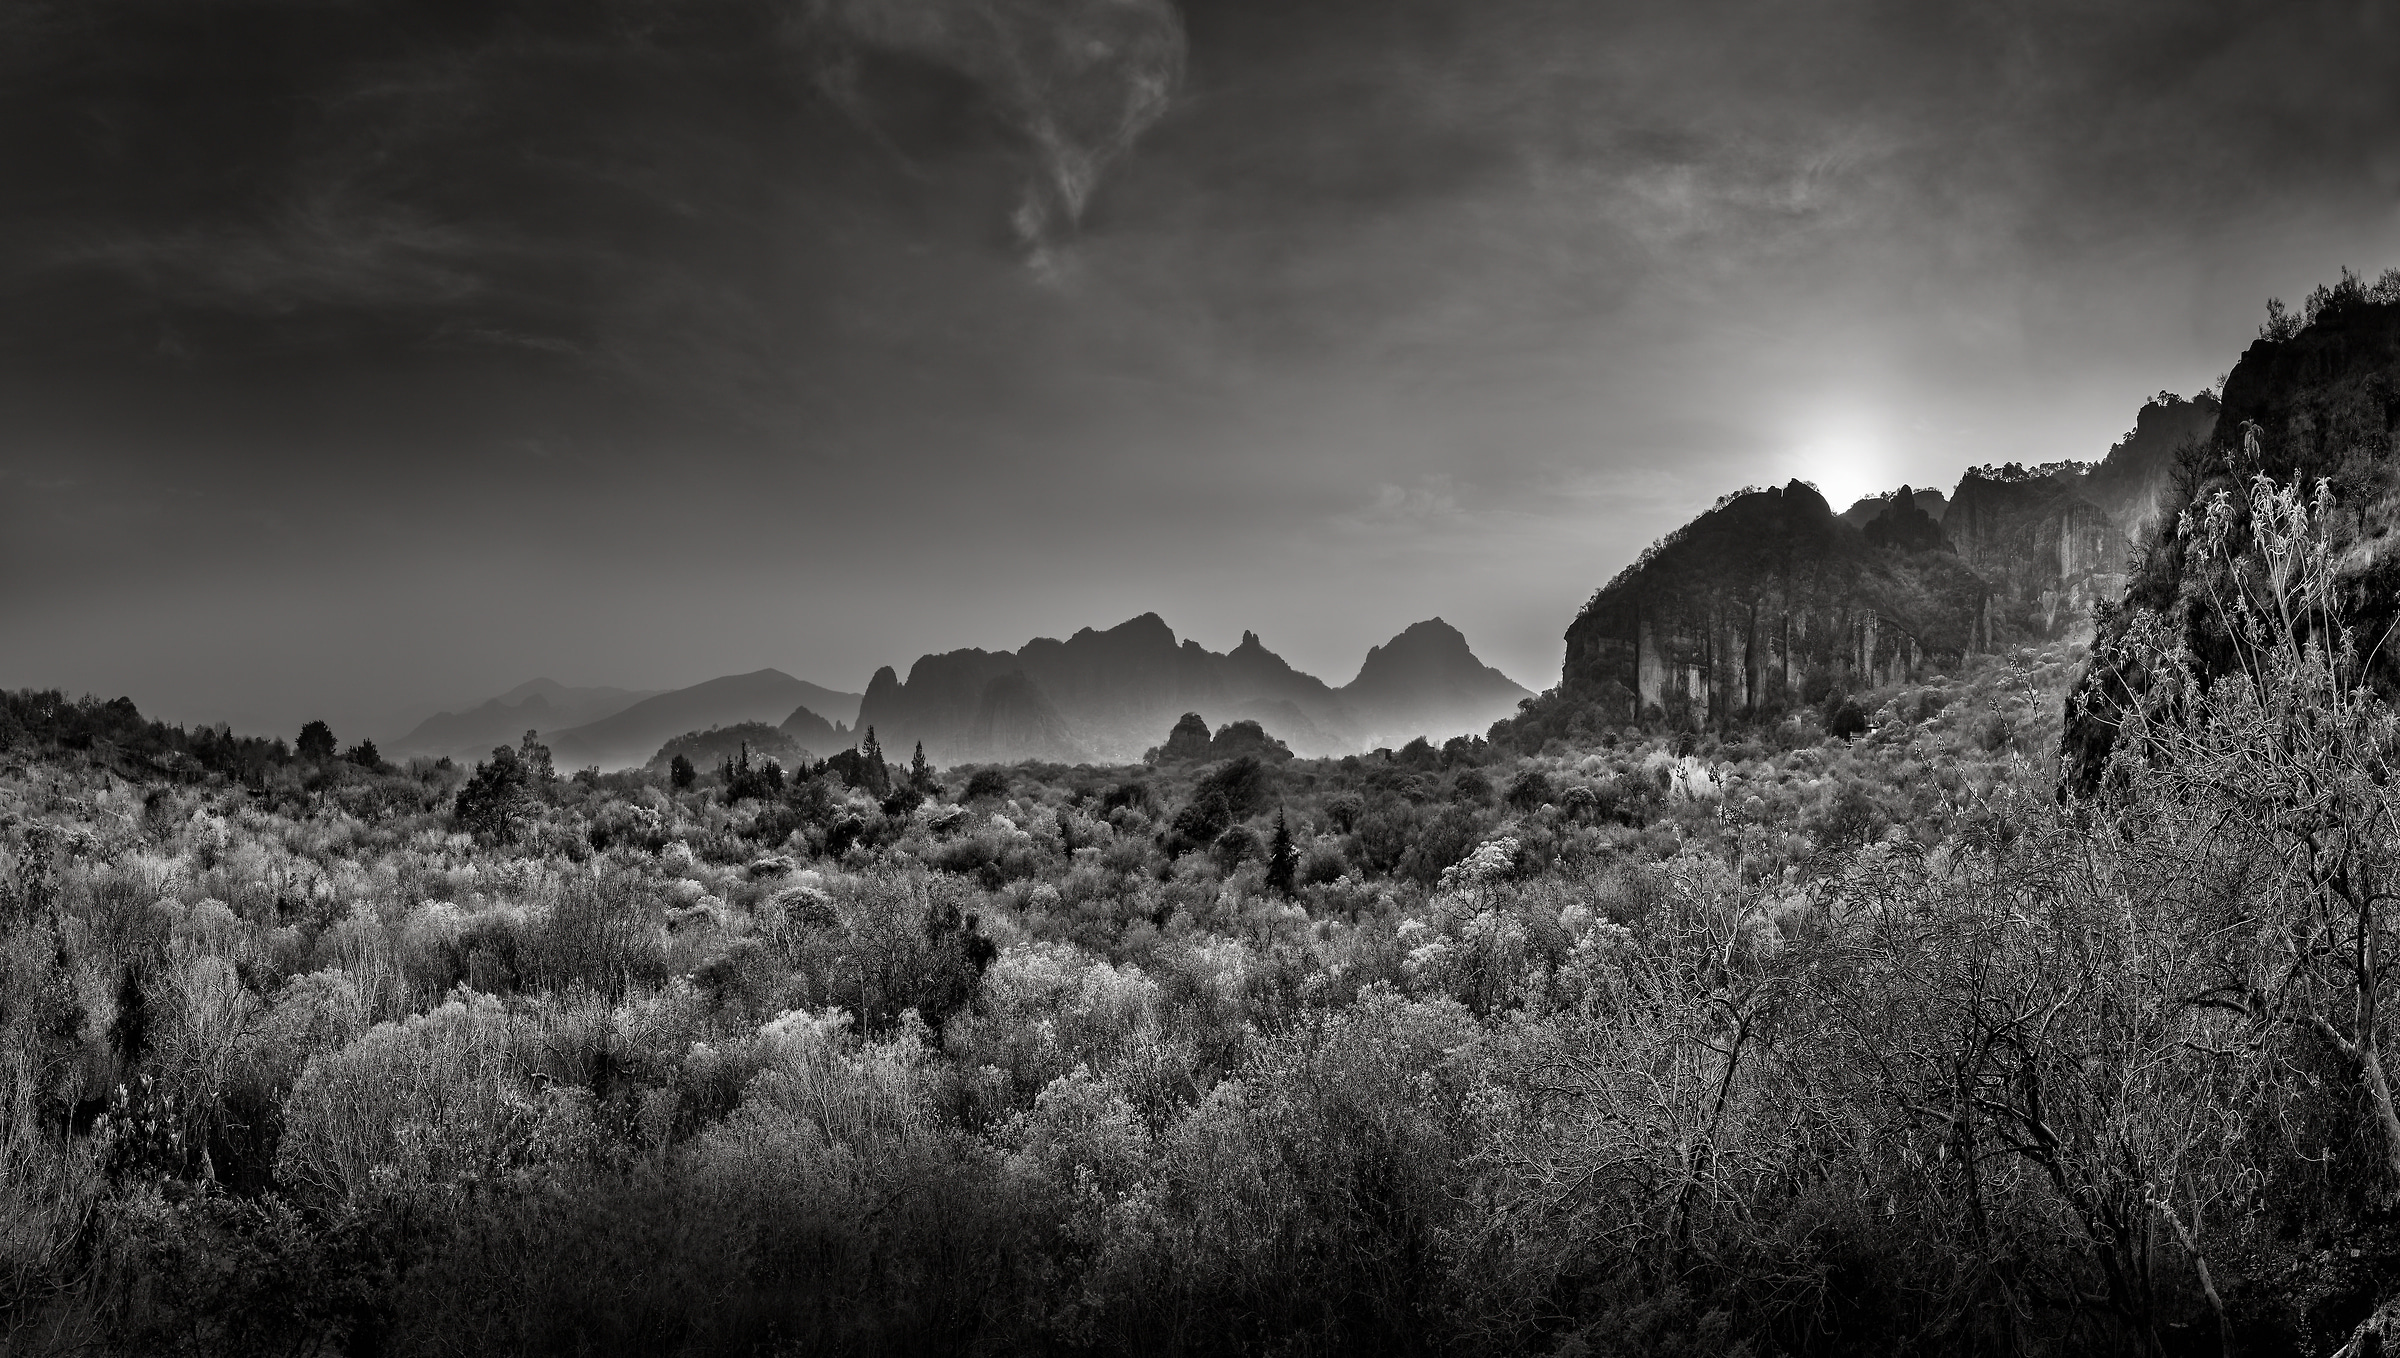 436 megapixels! A very high resolution, black & white VAST photo print of a Mexico landscape; photograph created by Peter Rodger in Tapoztlán, Mexico.